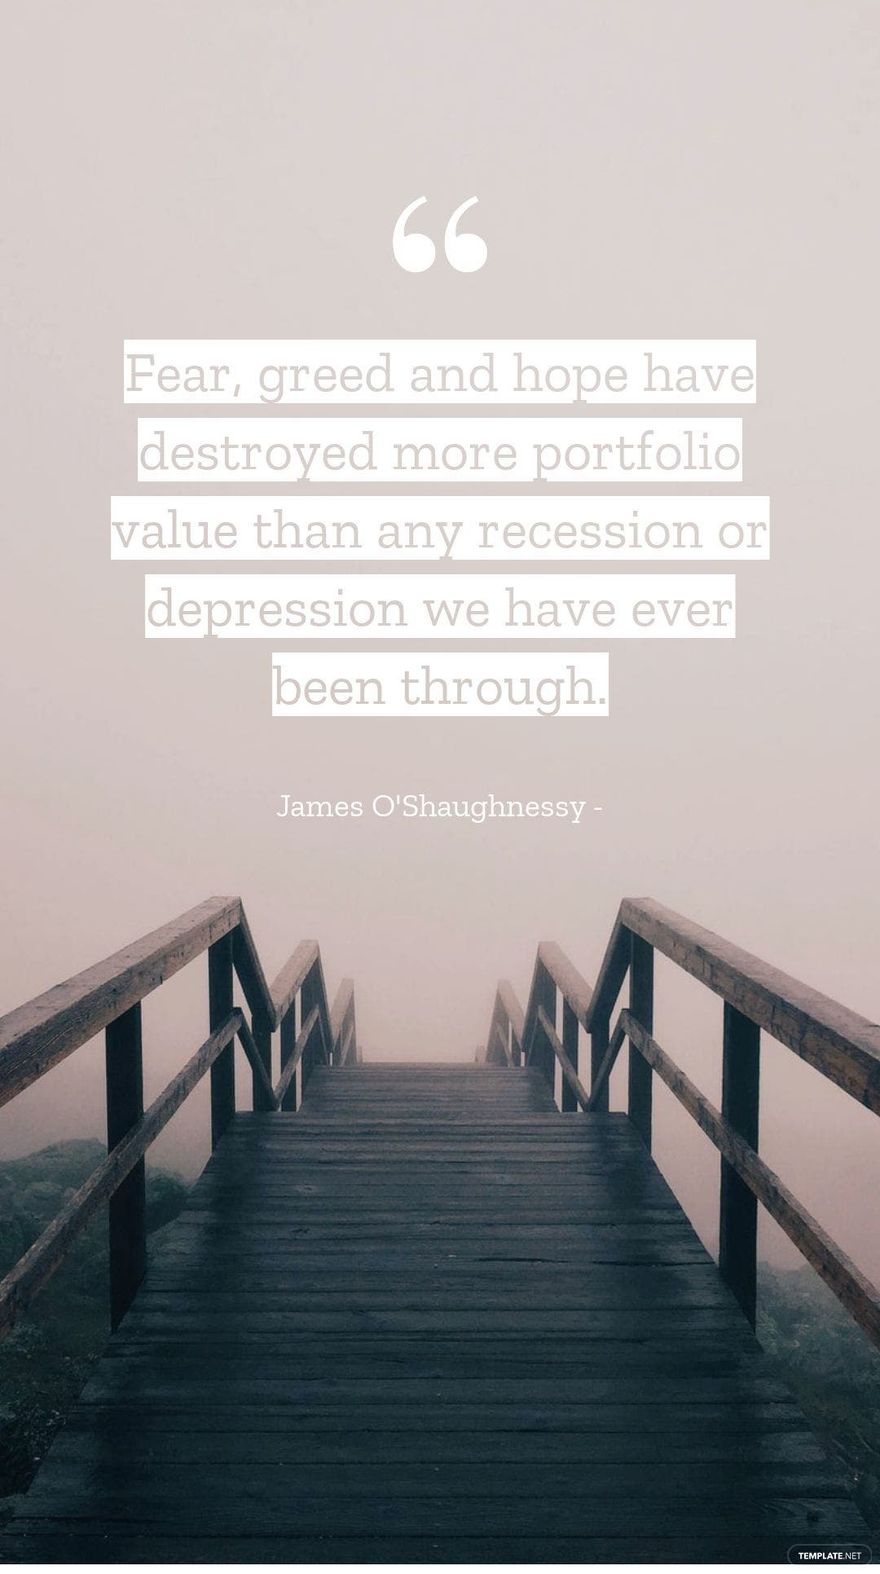 James O'Shaughnessy - Fear, greed and hope have destroyed more portfolio value than any recession or depression we have ever been through.